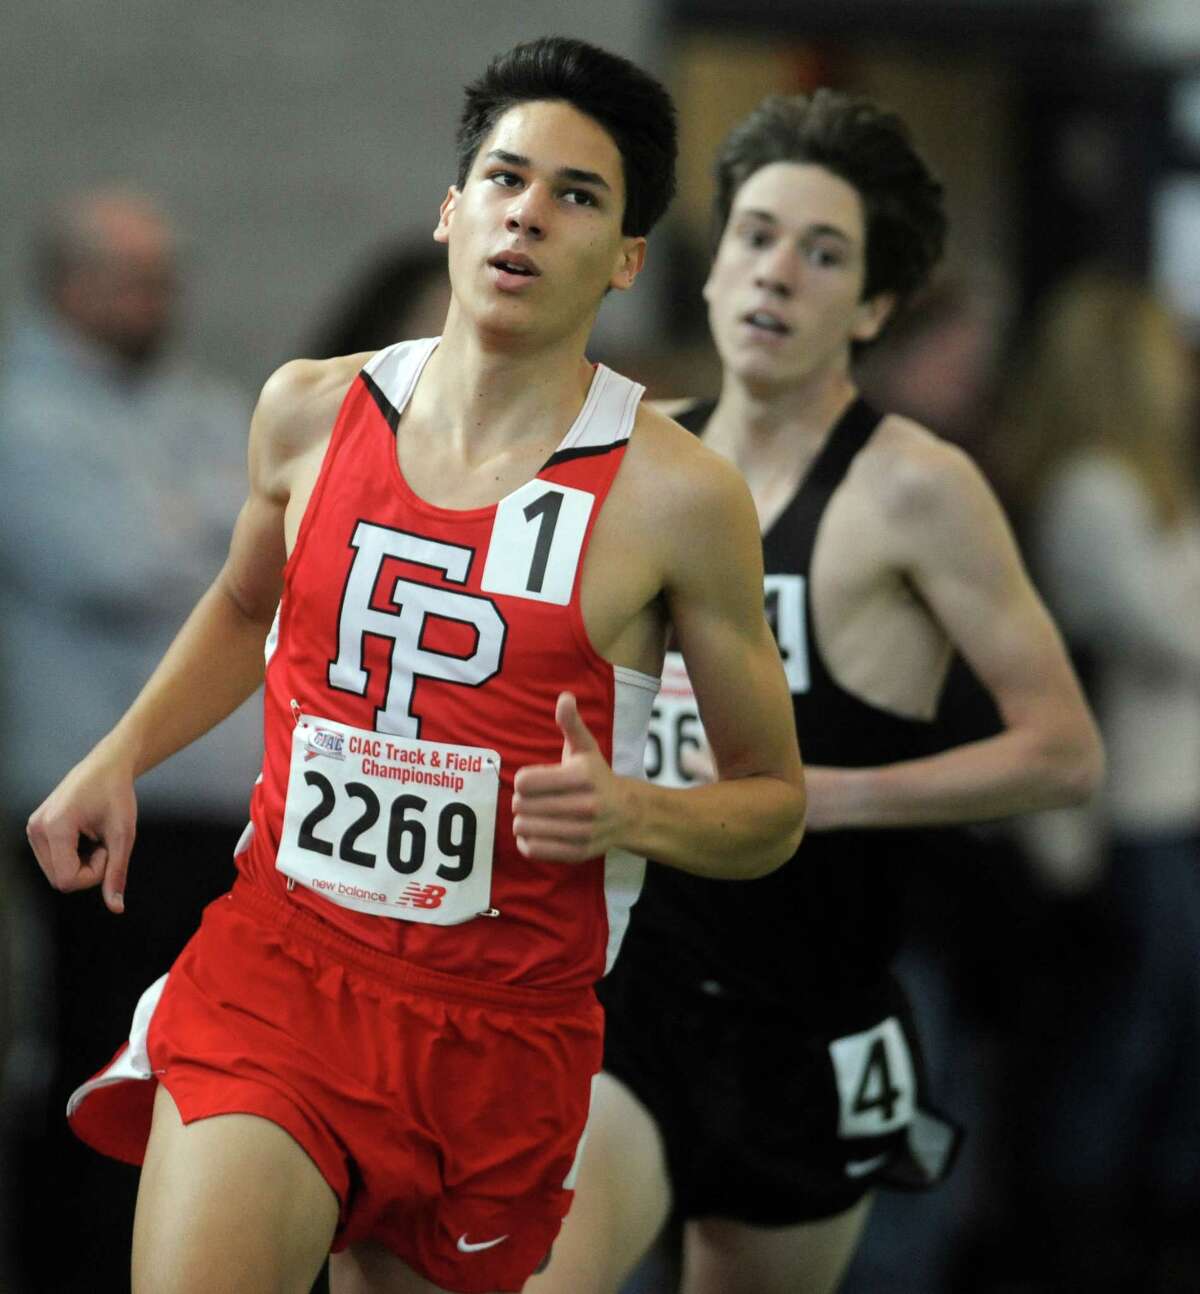 Fairfield Prep's Christian Alvarado competes in the 1600 meter race Saturday, Feb. 8, 2014, during the CIAC Class LL Boys and Girls track championships at the Floyd Little Athletic Center in New Haven, Conn.